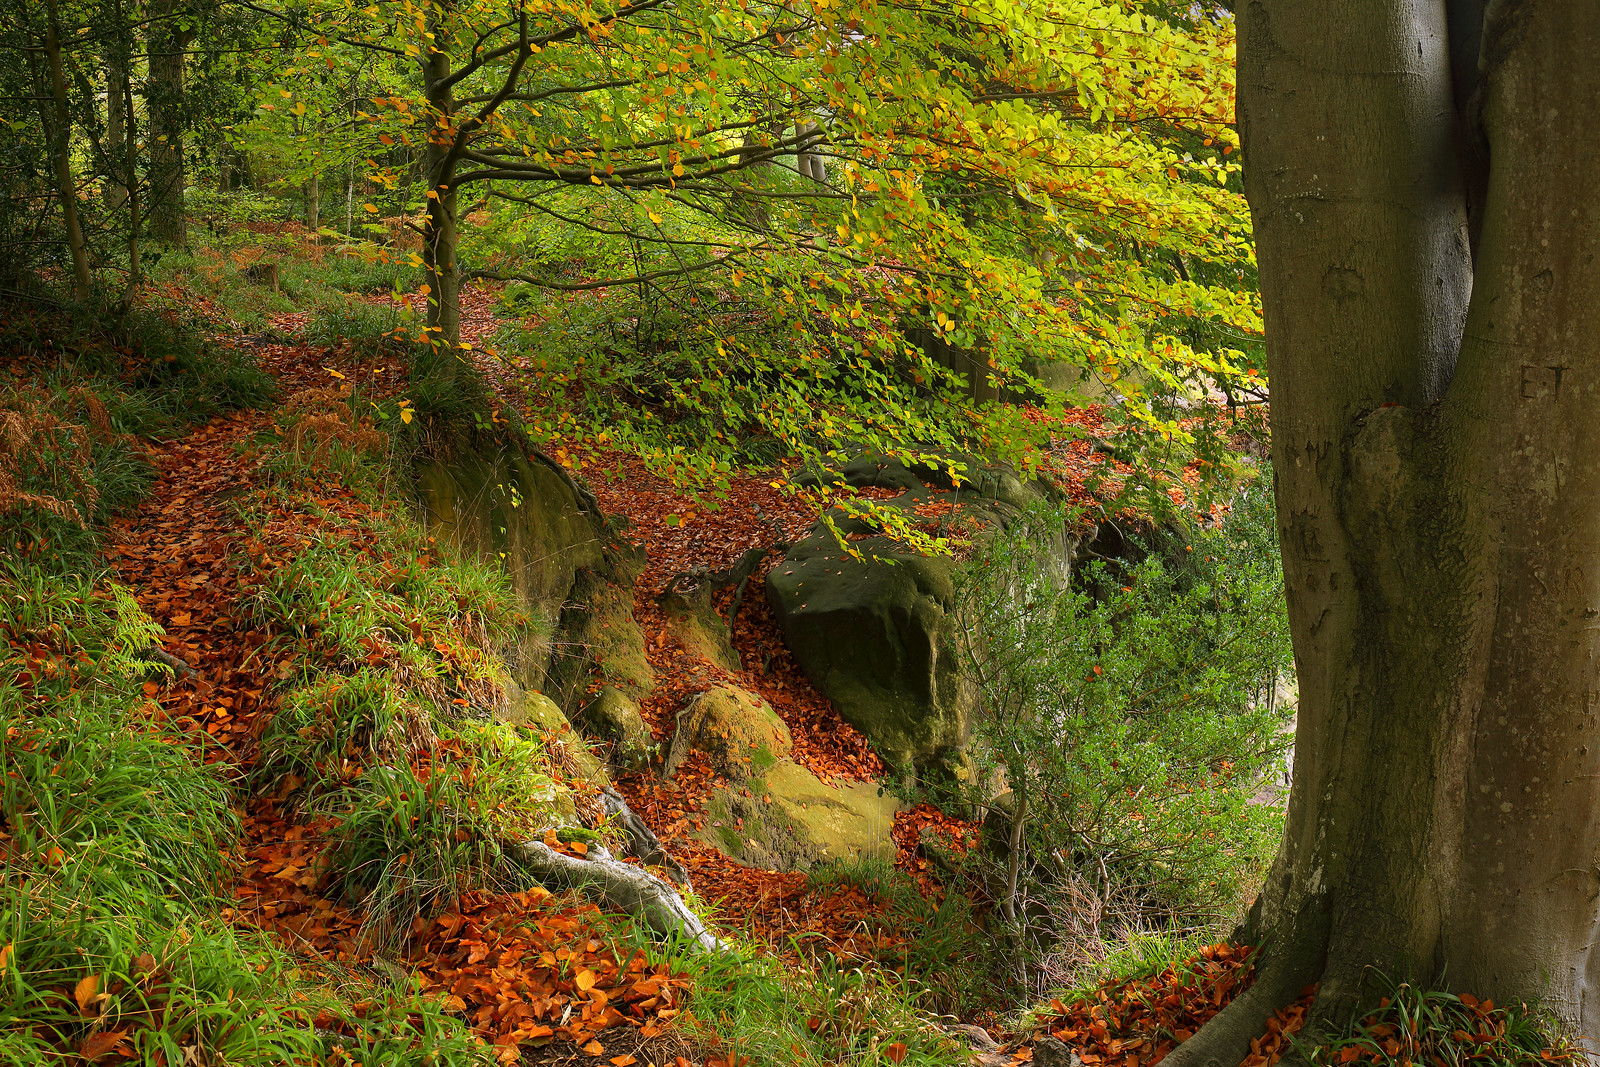 Beech woodland and rocky landscape in autumn